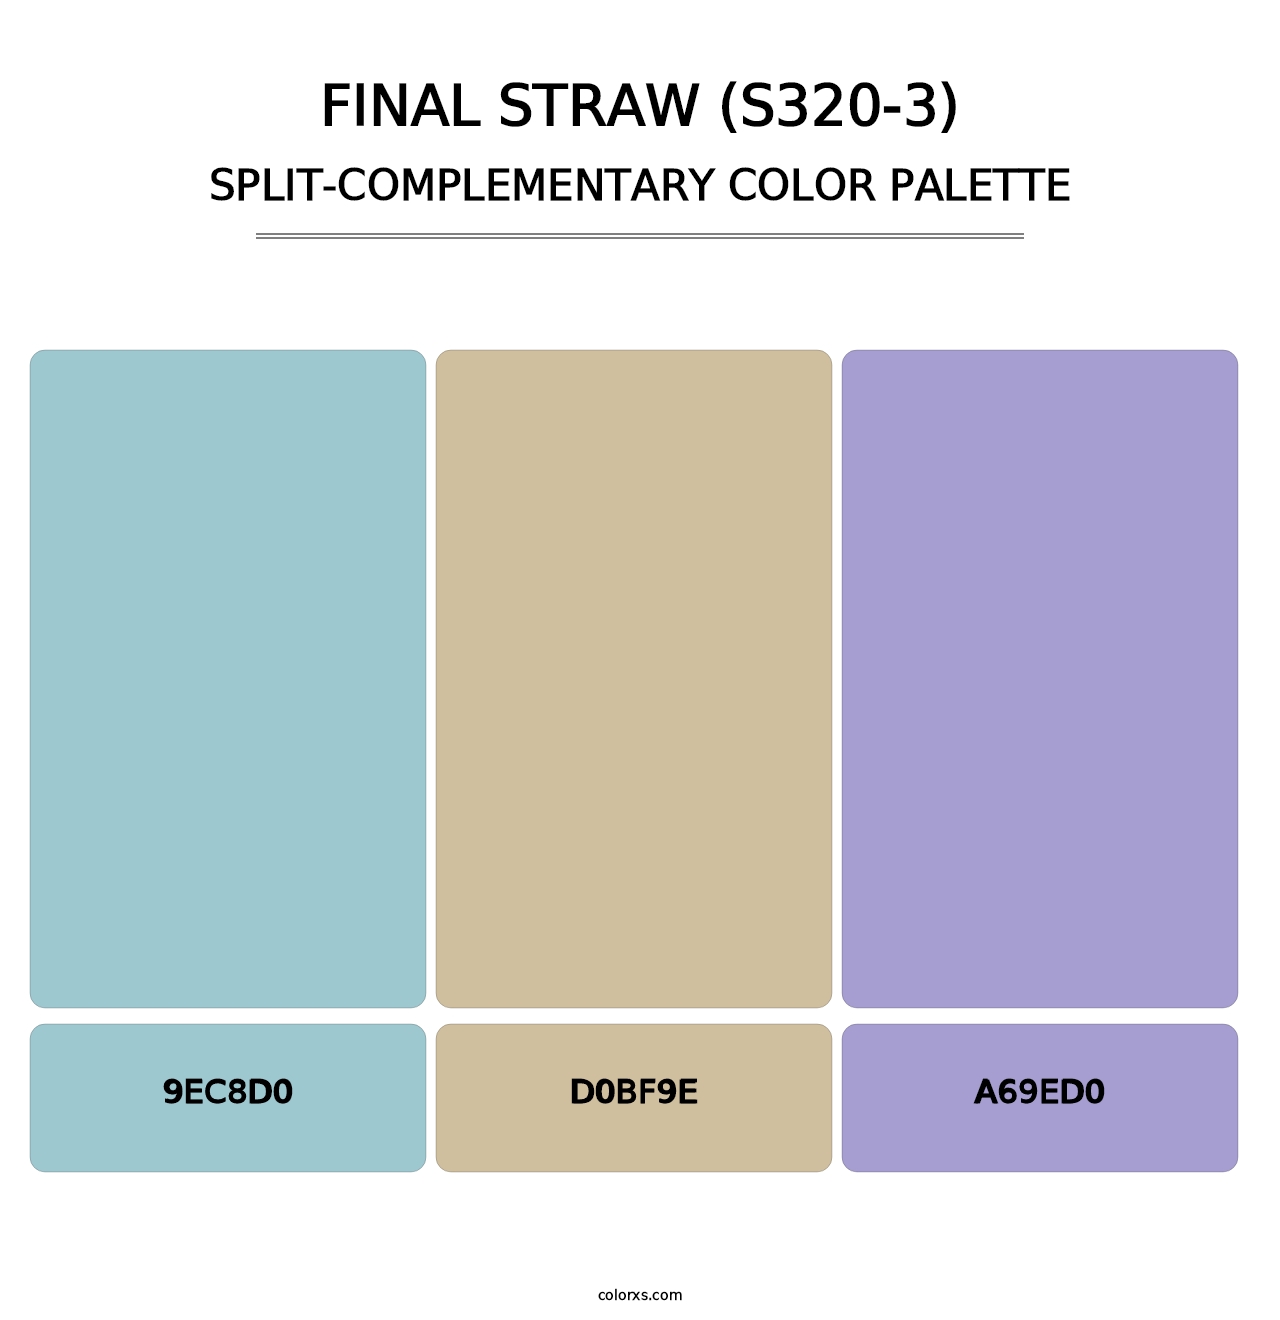 Final Straw (S320-3) - Split-Complementary Color Palette